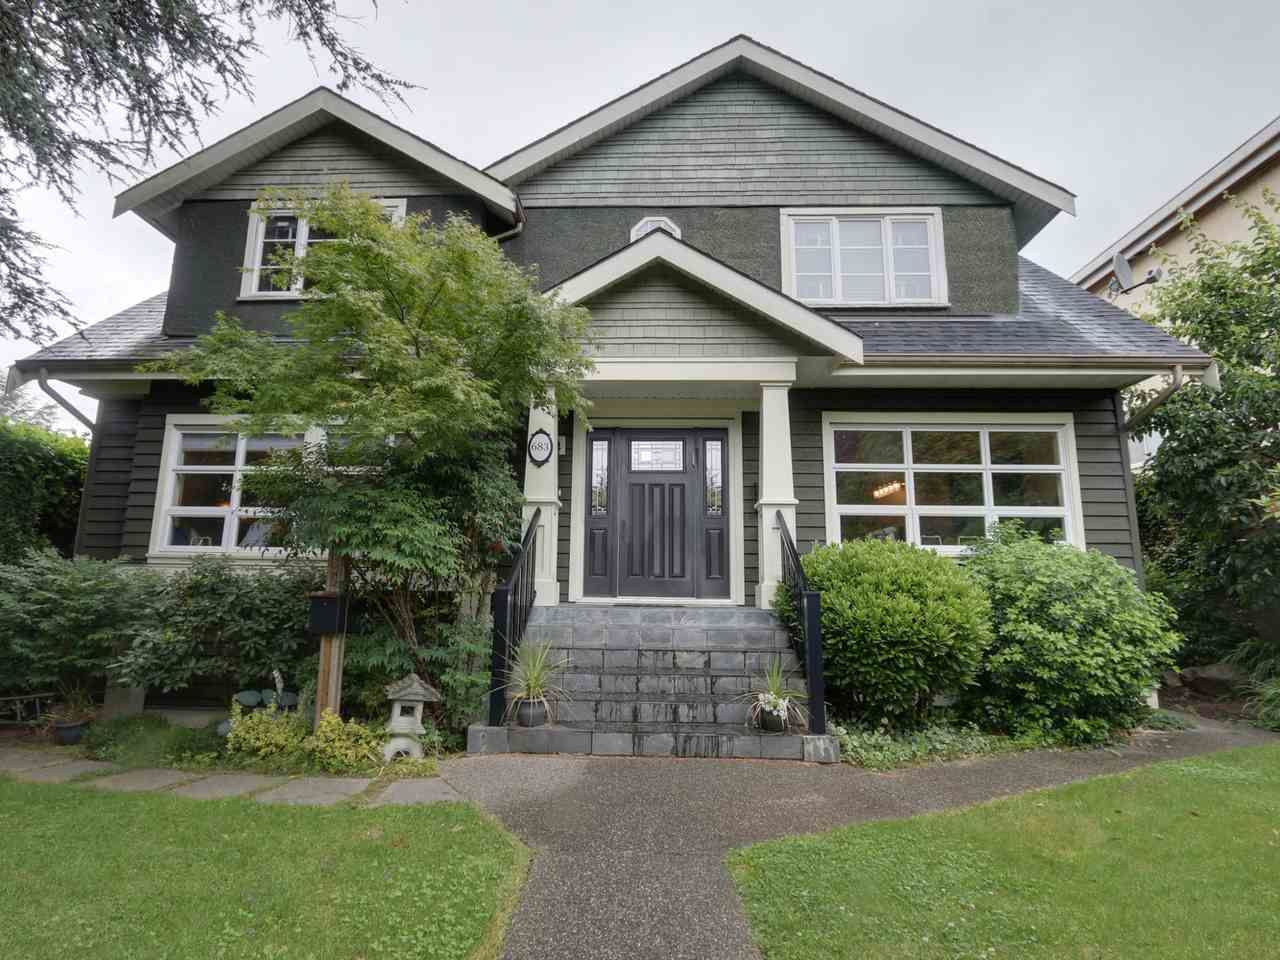 Main Photo: 683 W 28TH AVENUE in : Cambie House for sale : MLS®# R2087277